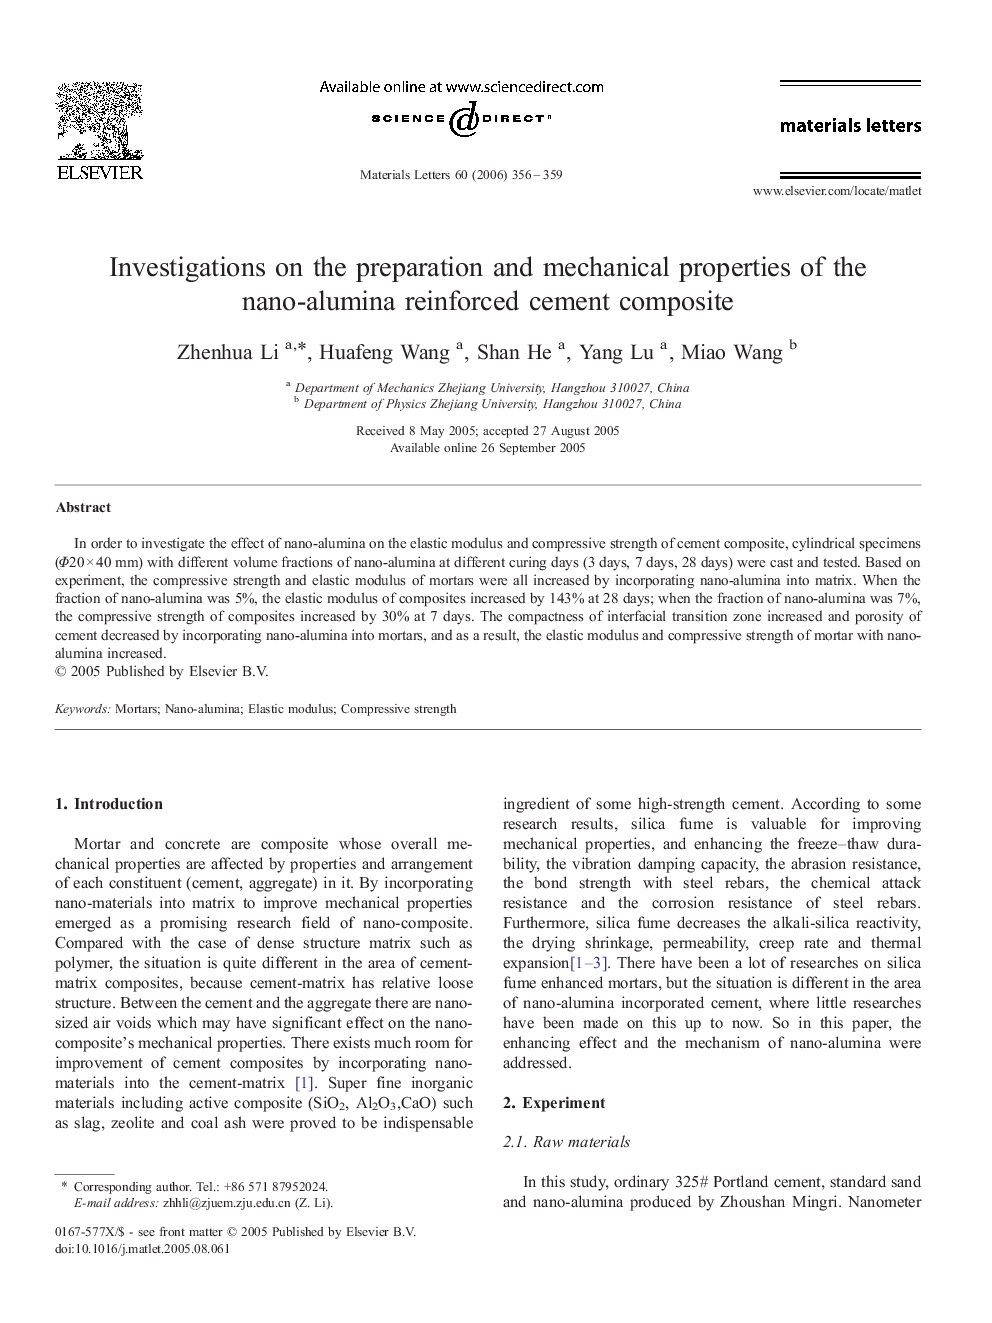 Investigations on the preparation and mechanical properties of the nano-alumina reinforced cement composite